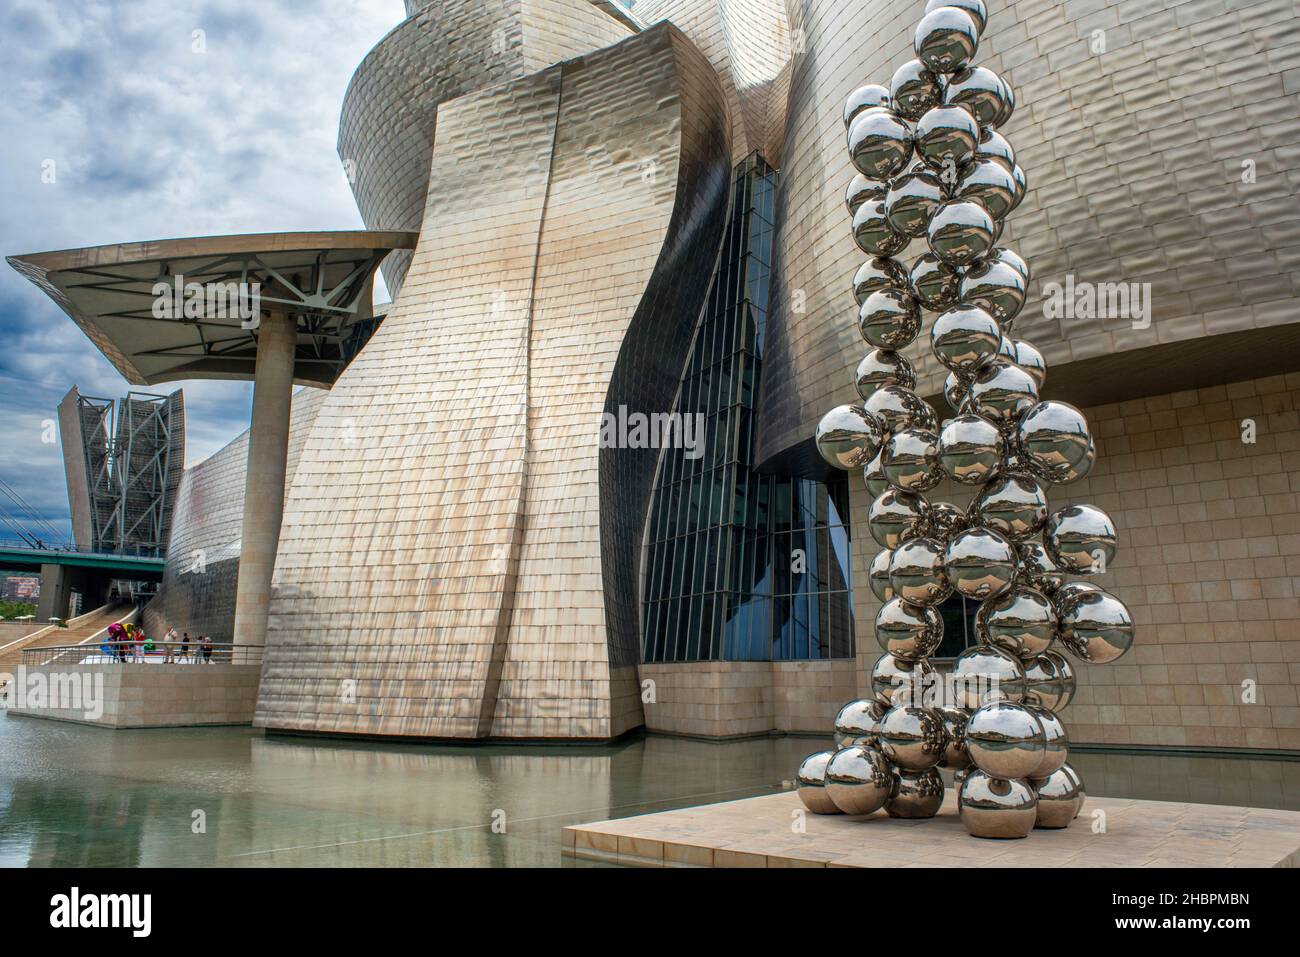 Guggenheim Museum and Silver Balls art exhibit, popular attractions in the New Town part of Bilbao, Basque Country, Spain Stock Photo